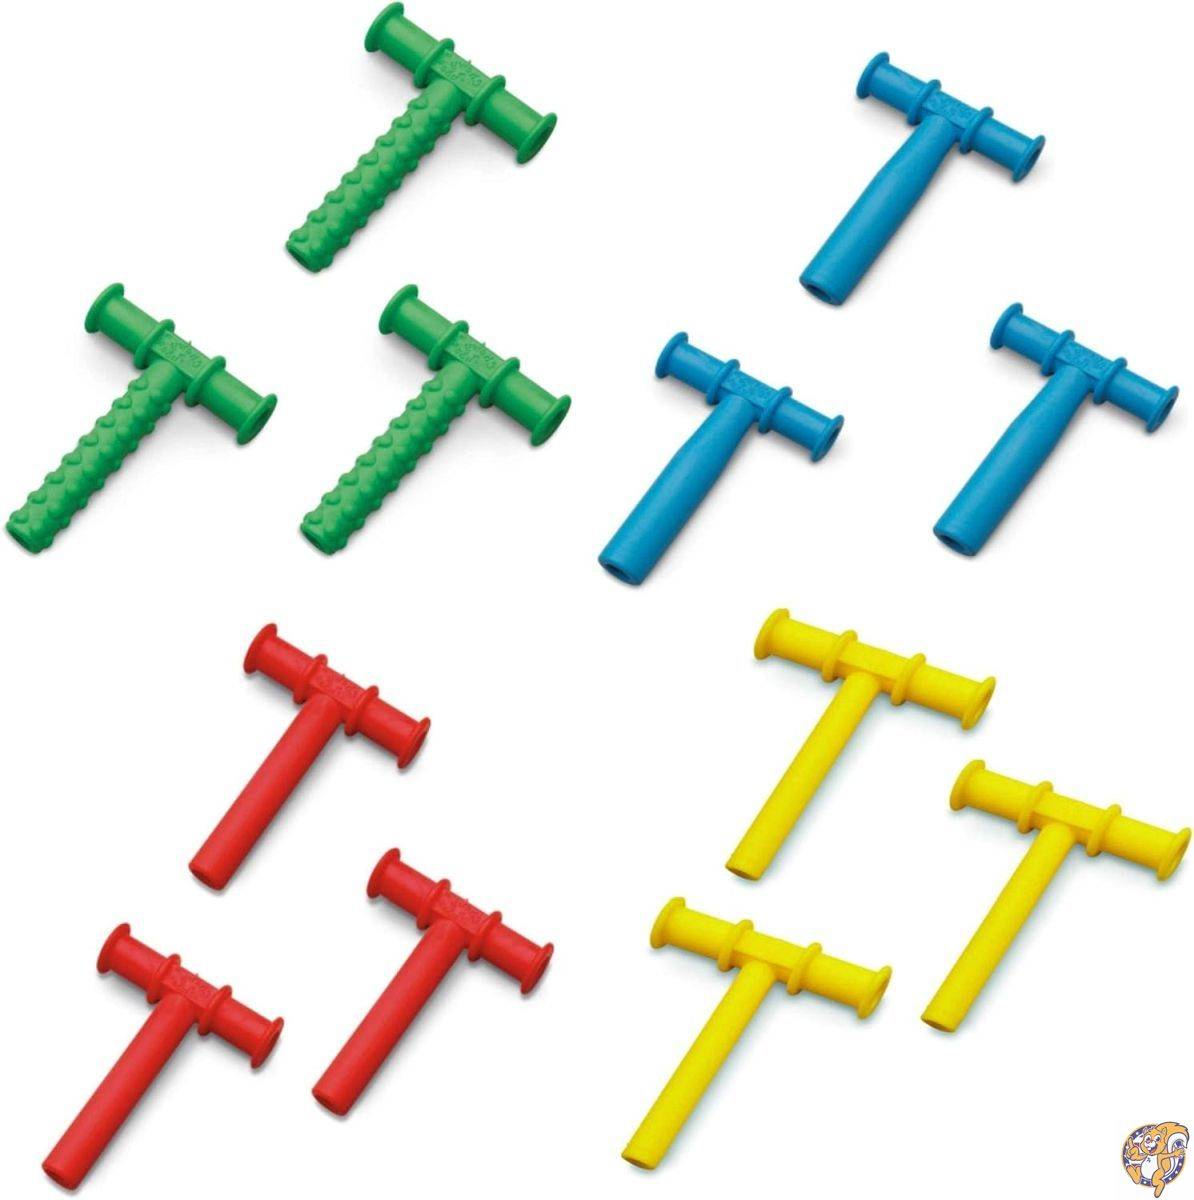 CHEWY TUBE MASTER COMBO PACK - 3 KNOBBY TEXTURE (BLUE) LARGE (RED) MEDIUM (YELLOW) SMALL by Chewy Tubes [並行輸入品]